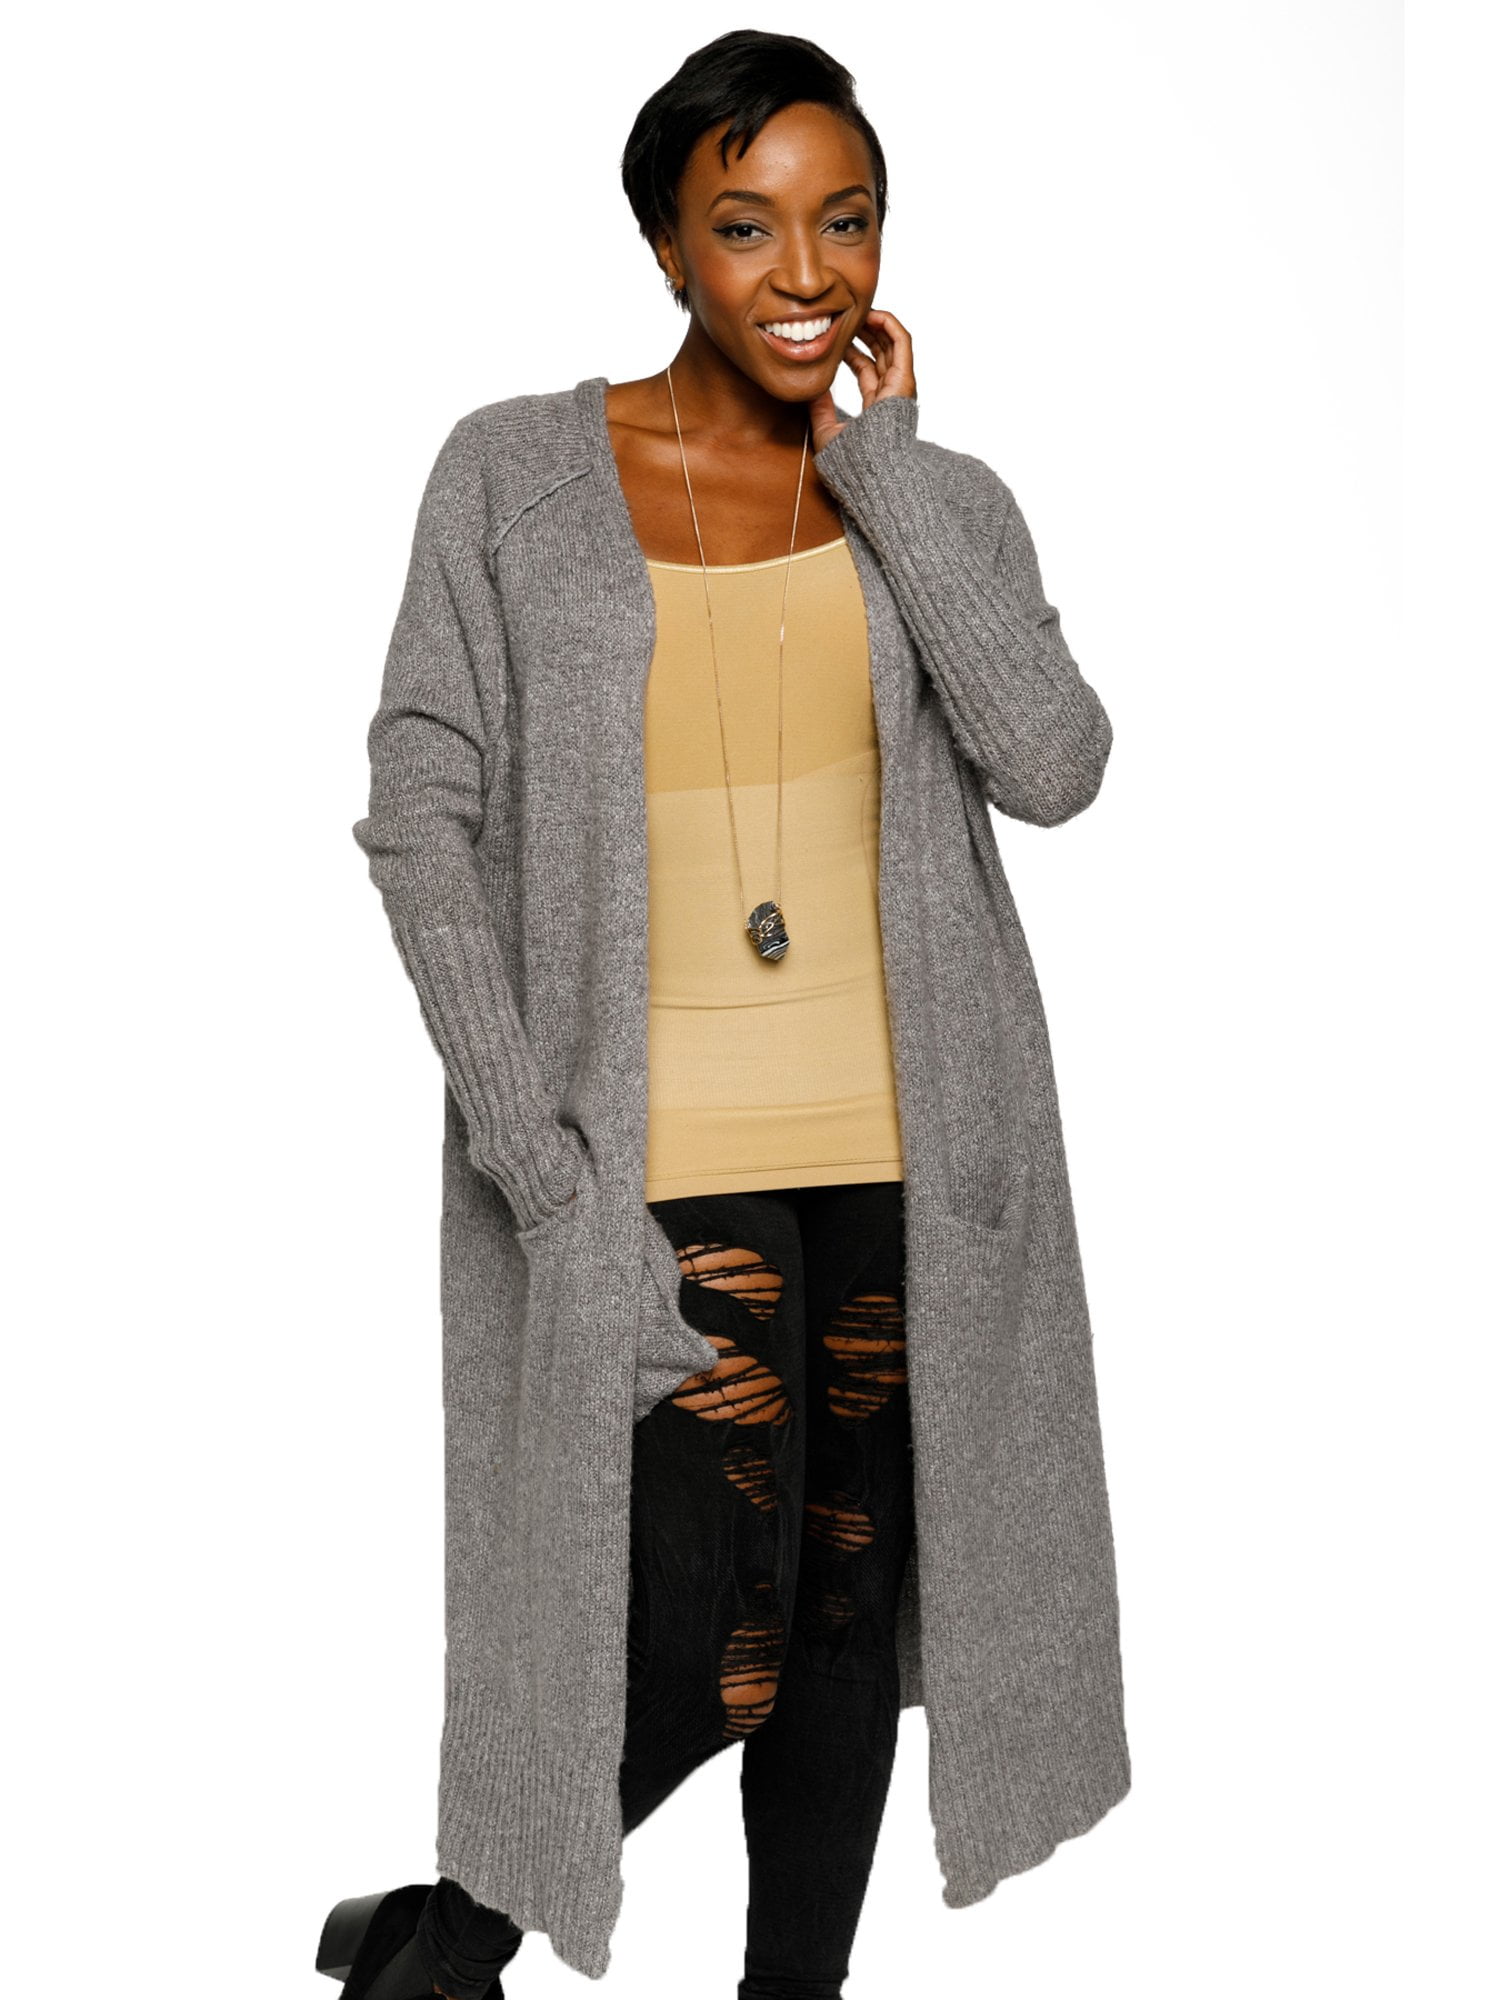 Style cardigan sweaters for women at walmart open adult macy's